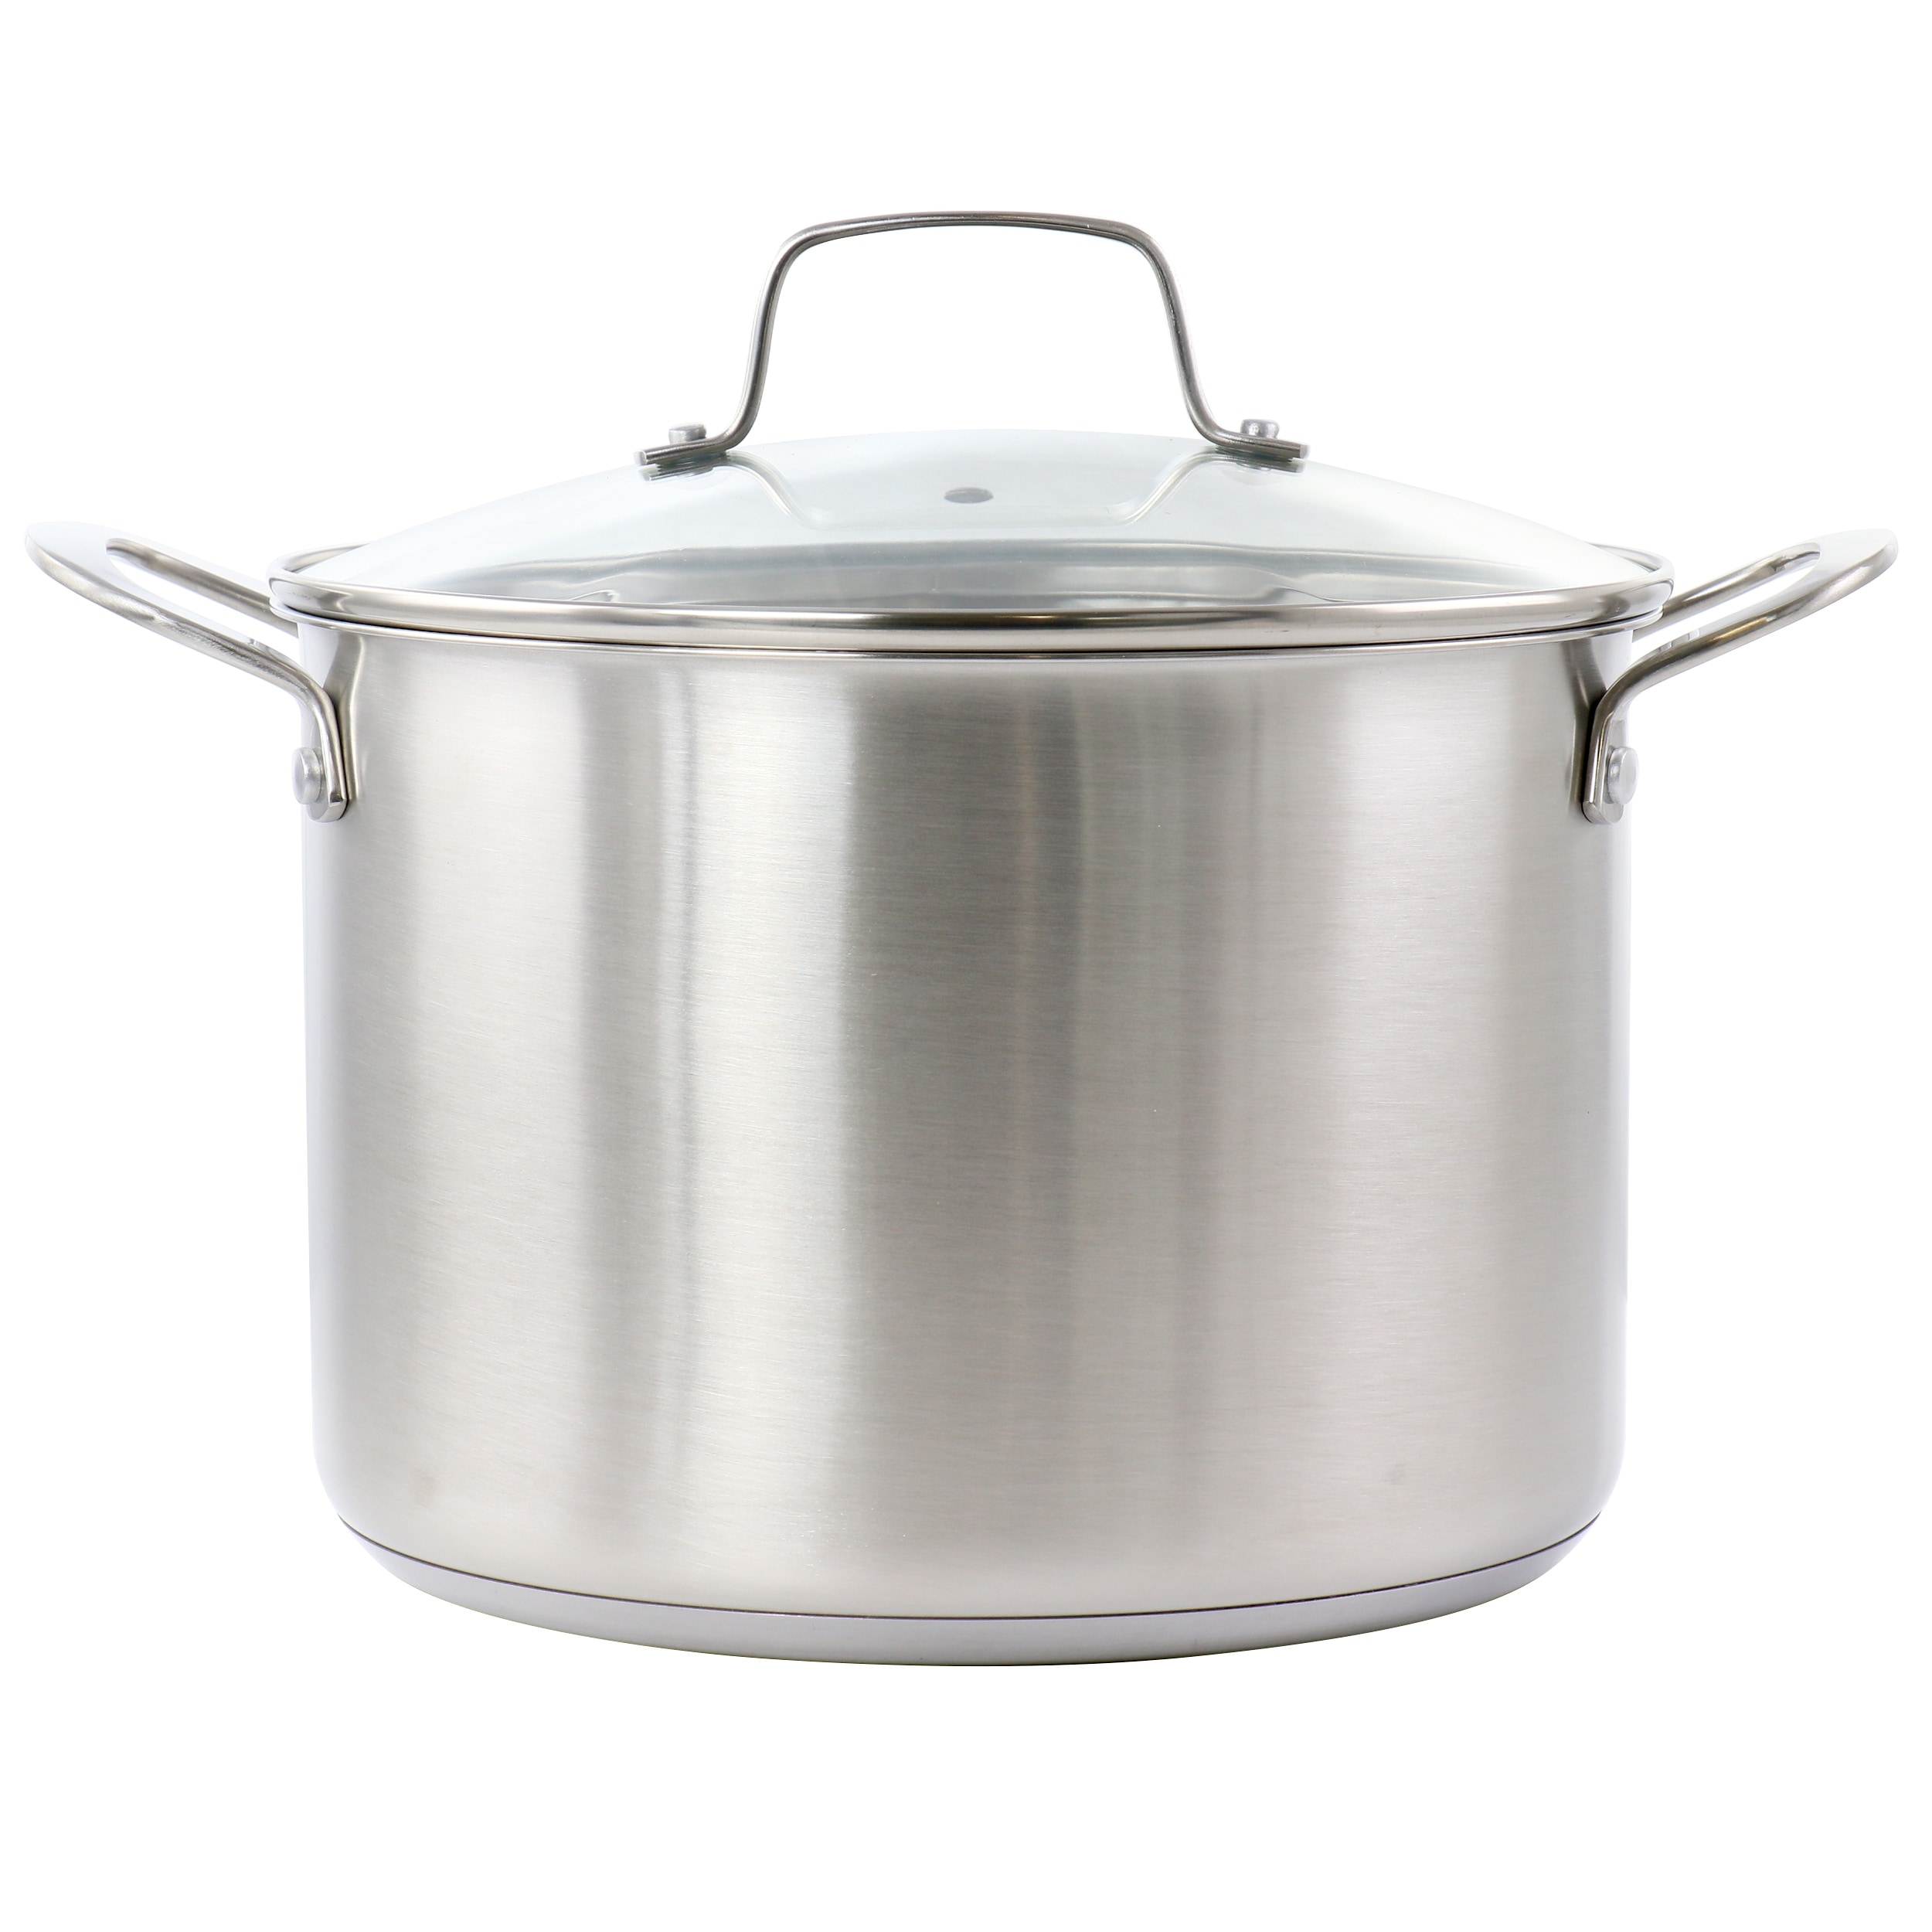 https://ak1.ostkcdn.com/images/products/is/images/direct/fd23376ecf7eaf0adbf2cc631bbed0241a8e59ba/8-Quart-Stainless-Steel-Stock-Pot.jpg